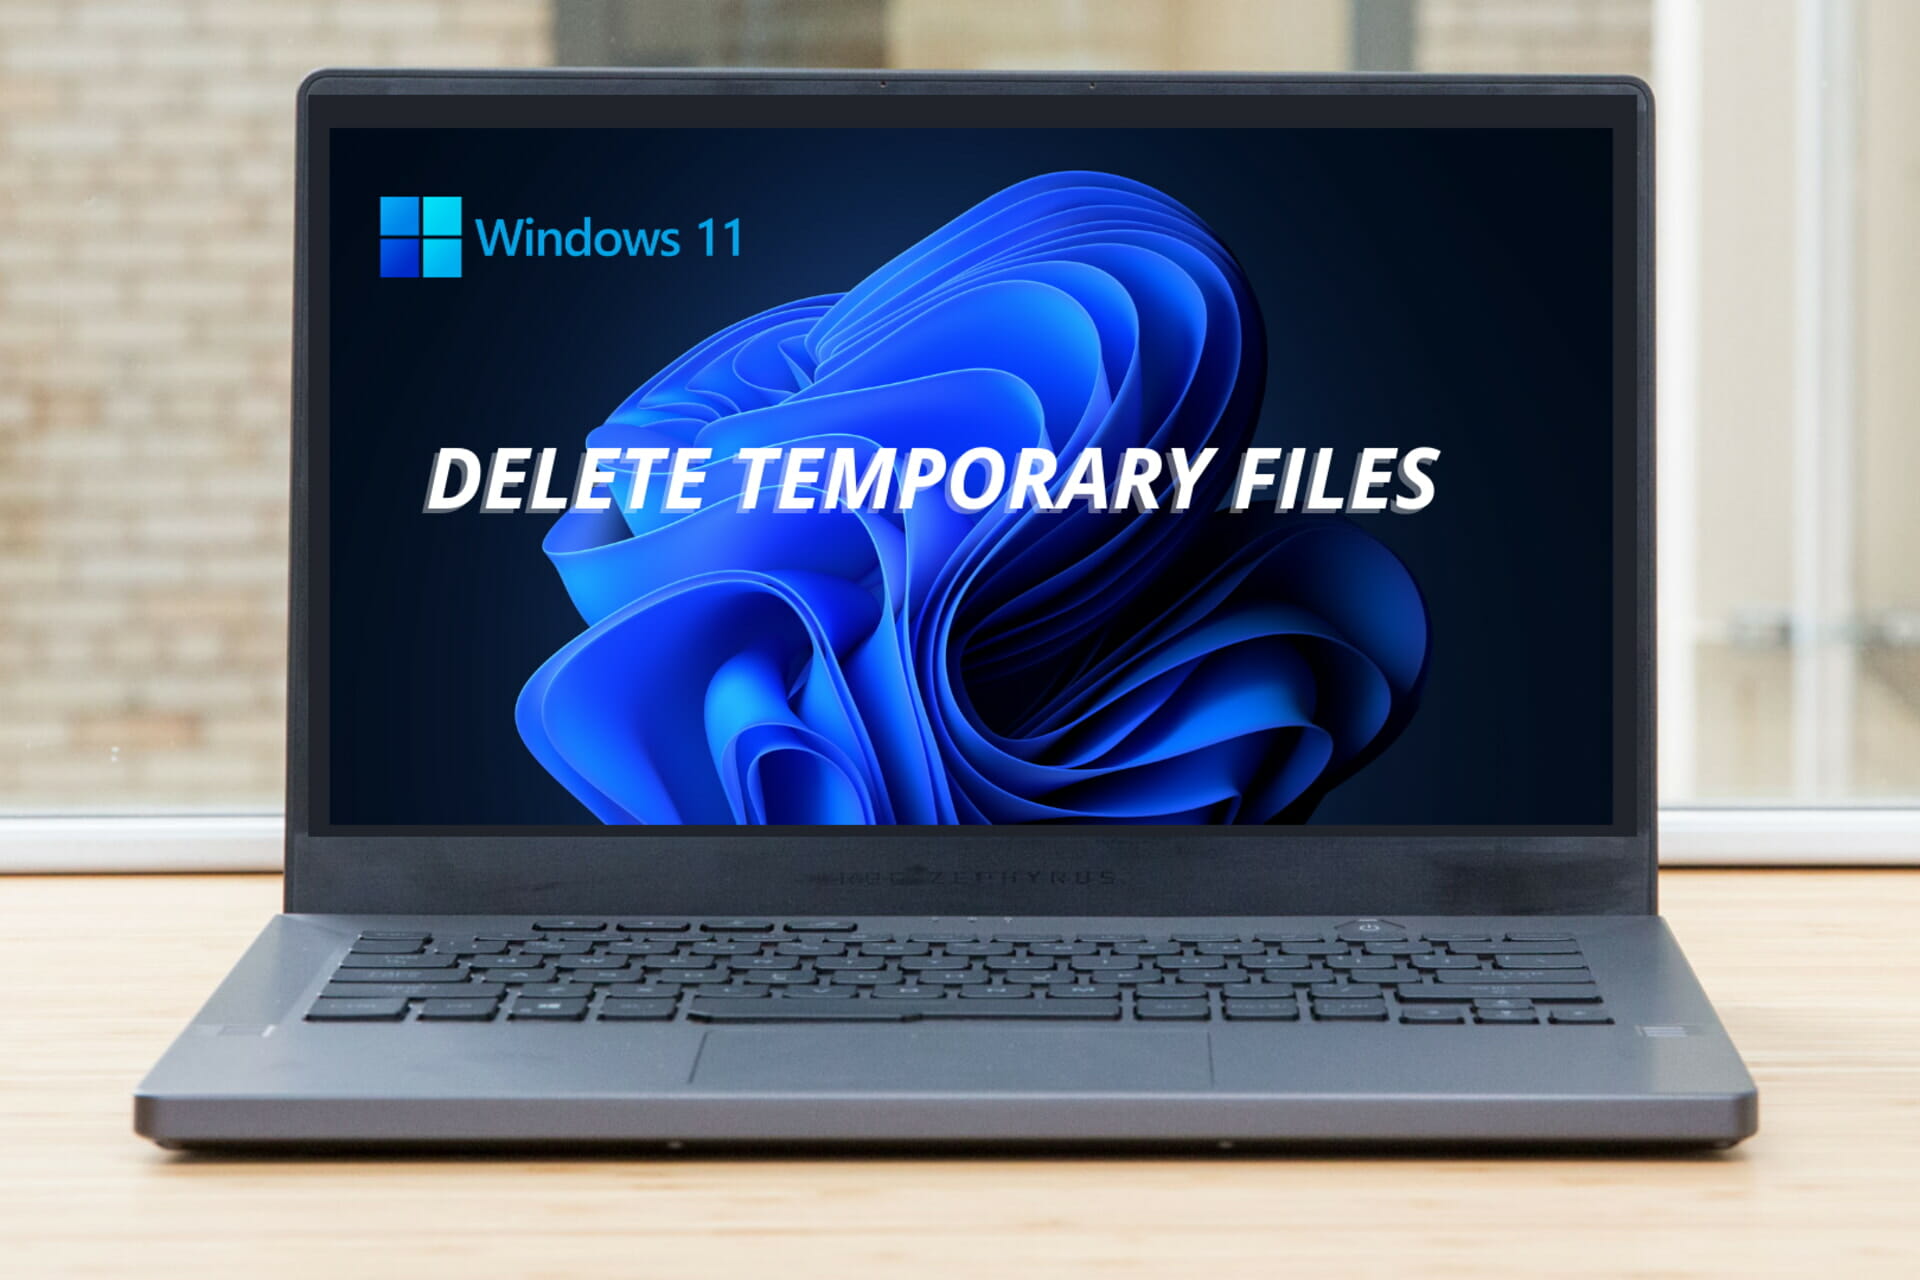 How to delete Temporary Files in Windows 11 [Complete Guide]